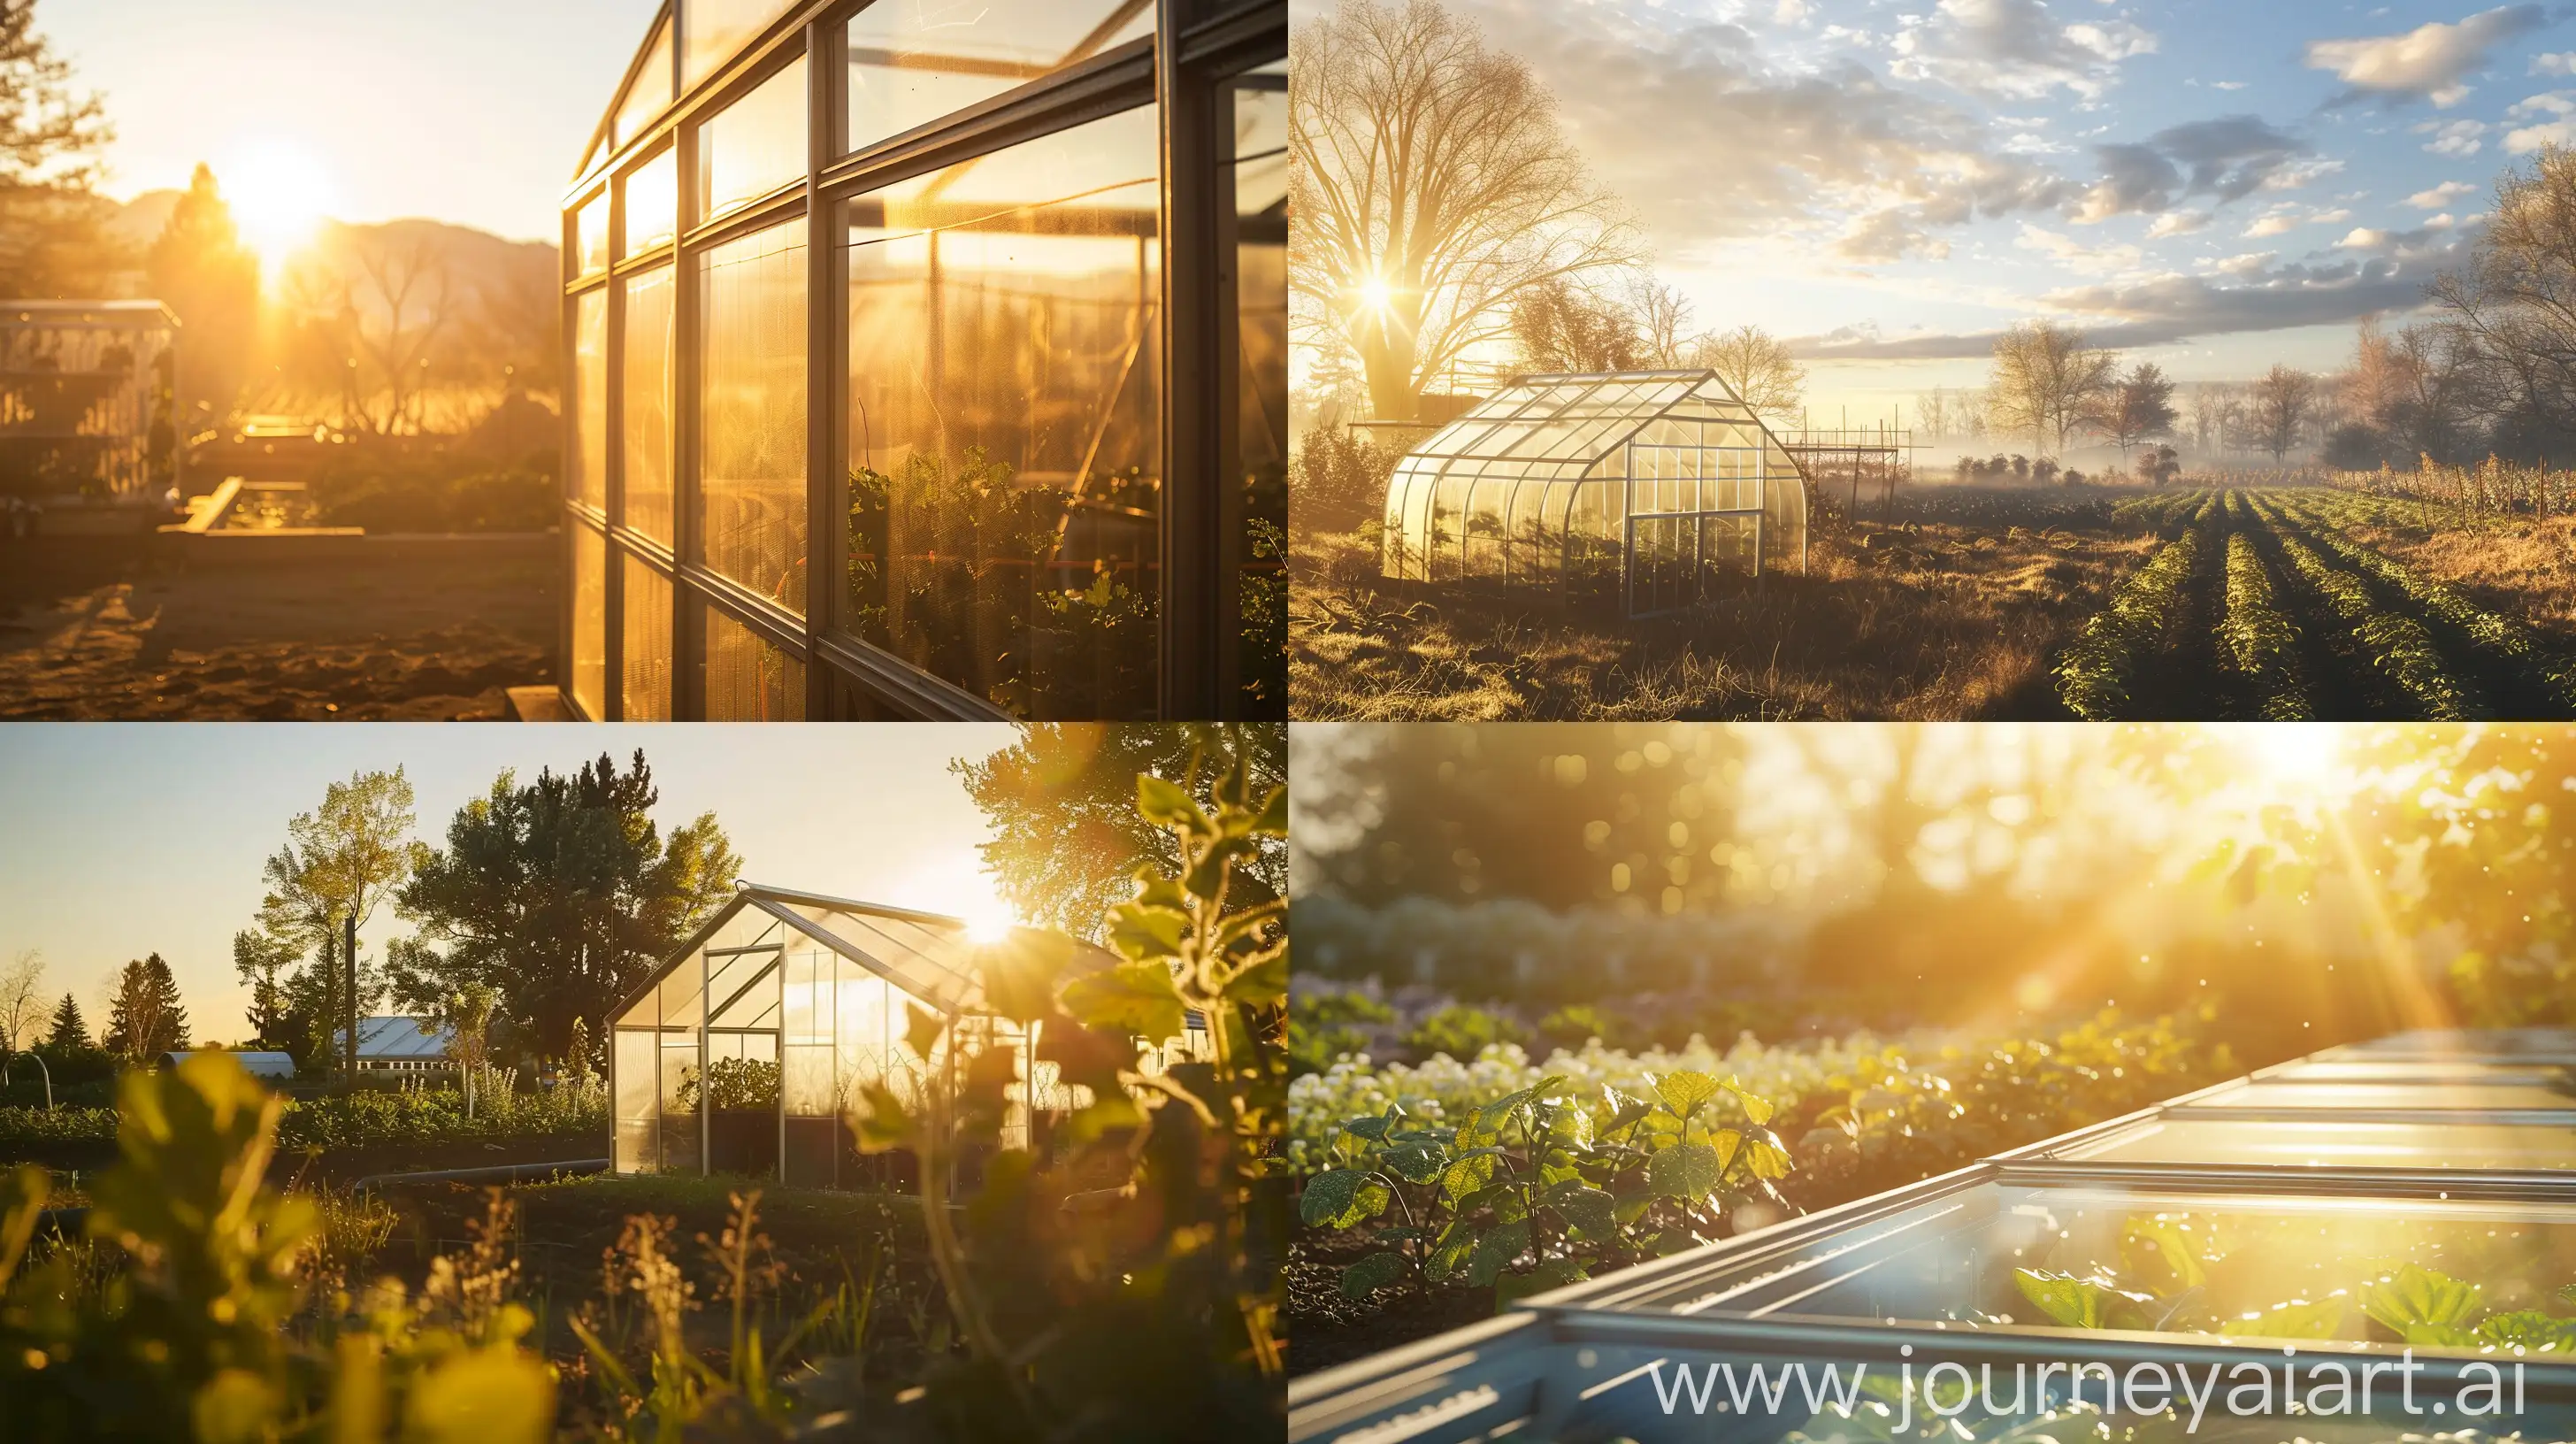 High detailed photo capturing a Bio-Star 1500 Premium Cold Frame. The sun, casting a warm, golden glow, bathes the scene in a serene ambiance, illuminating the intricate details of each element. The composition centers on a Bio-Star 1500 Premium Cold Frame. Dont want a full size greenhouse, but do want to start your seeds early before the last possible cold spell? Use a Cold-Frame!  Cold-frames are easy to assemble. use during the Spring season, then disassemble and store (flat) for later Fall crops. Require. The image evokes a sense of tranquility and natural beauty, inviting viewers to immerse themselves in the splendor of the landscape. --ar 16:9 